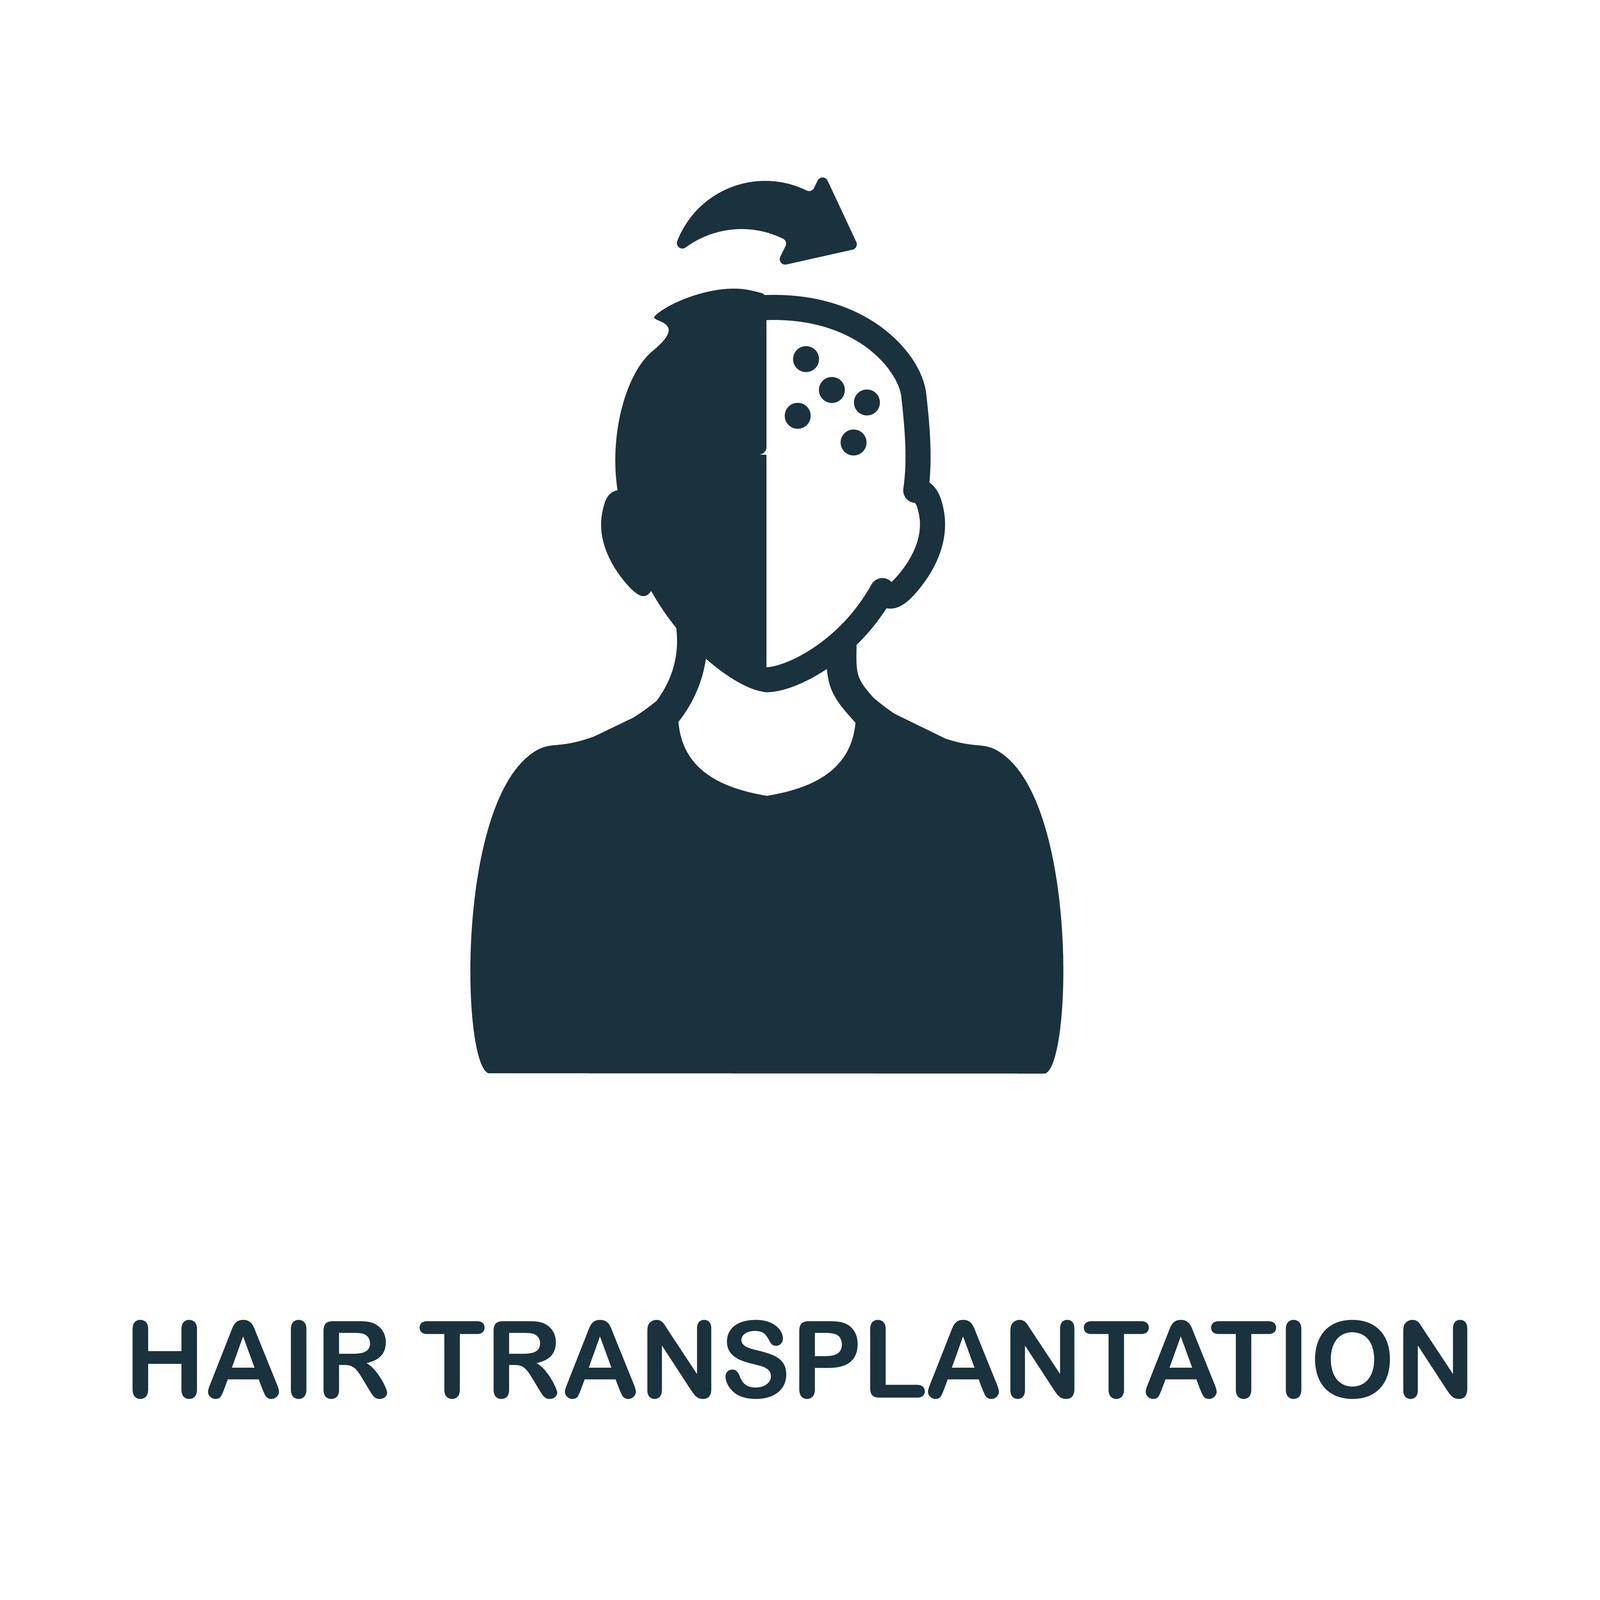 Hair Transplantation flat icon. Colored element sign from transplantation collection. Flat Hair Transplantation icon sign for web design, infographics and more. by simakovavector